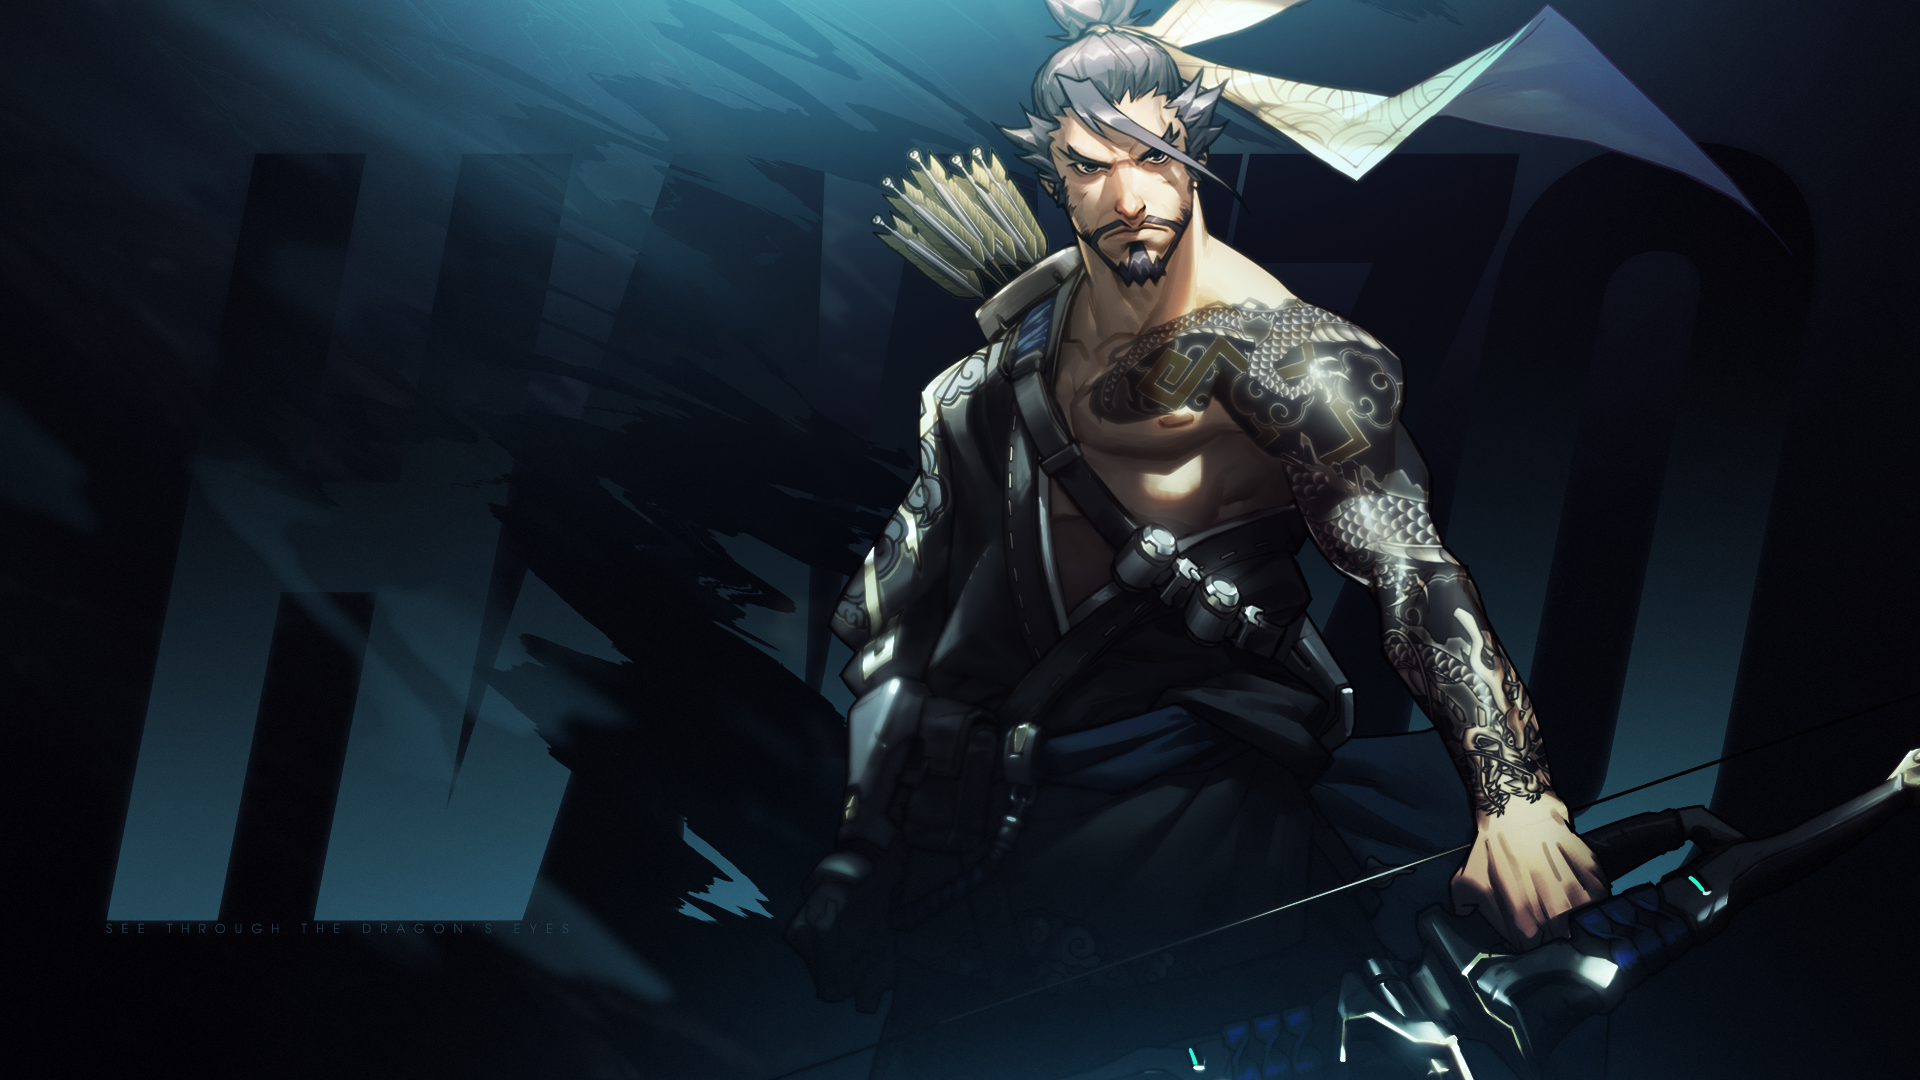 Overwatch   Hanzo Wallpaper by MikoyaNx on